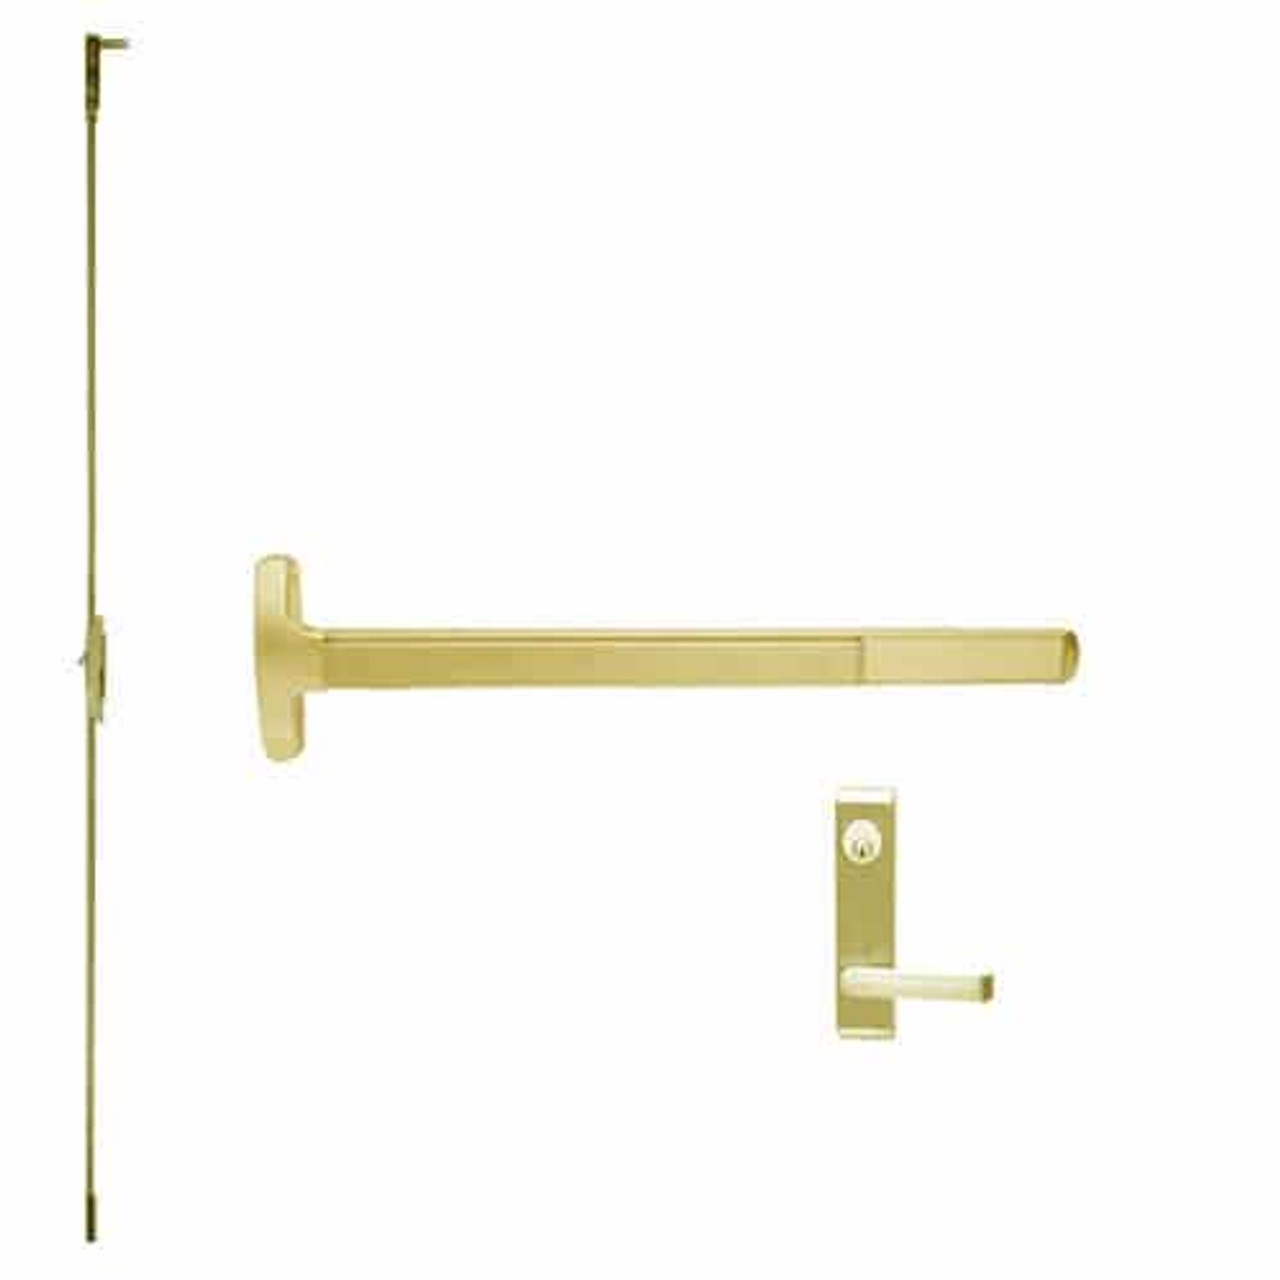 F-24-C-L-DANE-US3-4-LHR Falcon Exit Device in Polished Brass